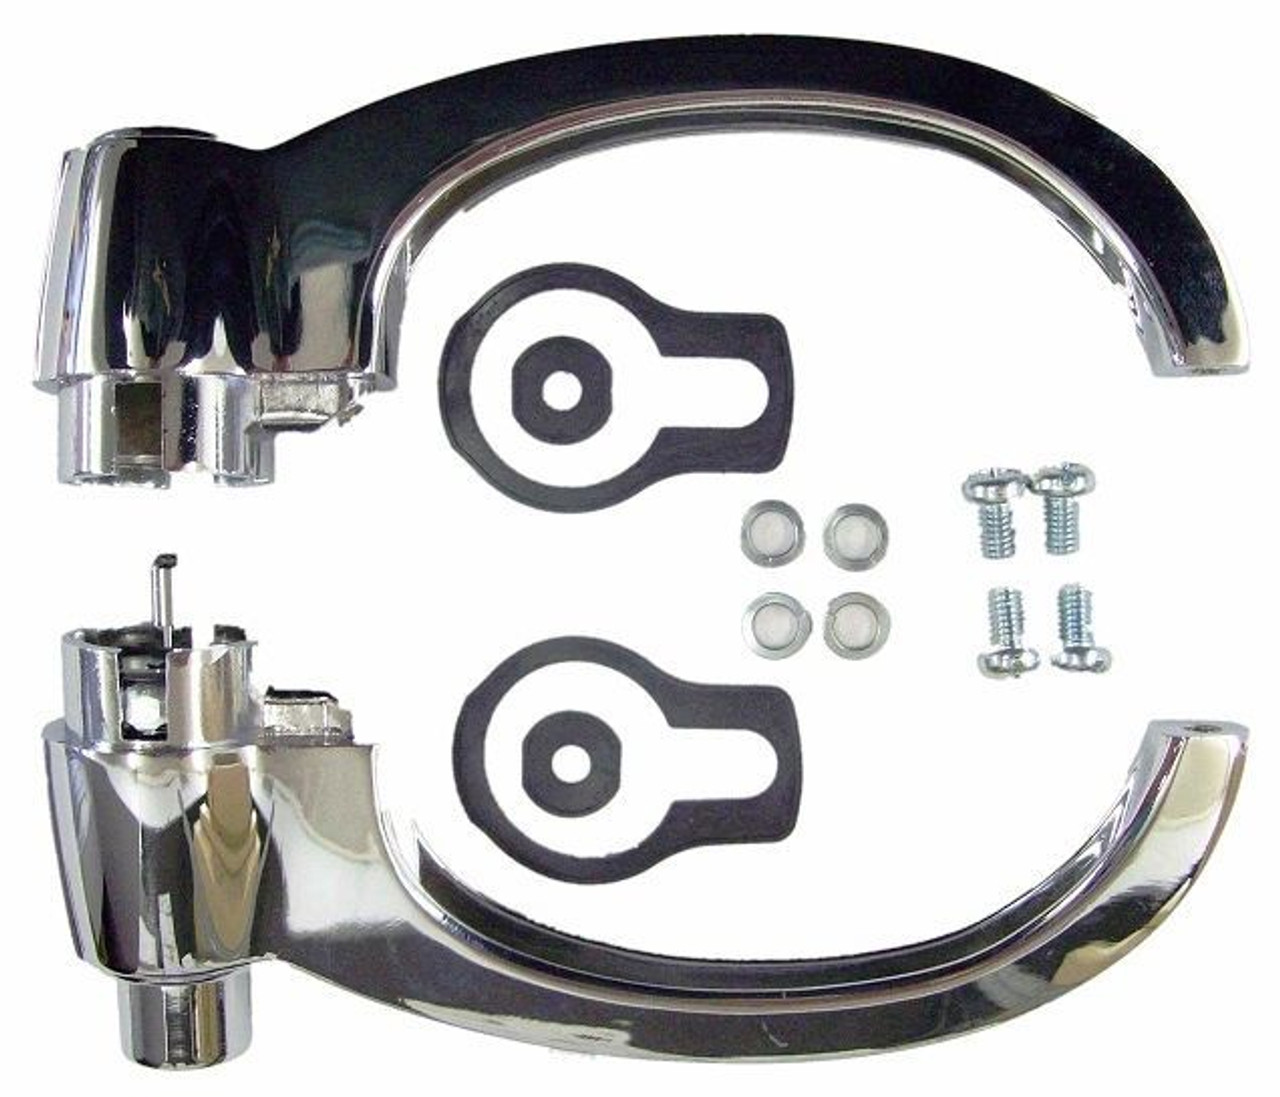 1952-59 Chevy/GMC Truck Outside Door Handle Sets (includes RH-LH gaskets and screws) set.